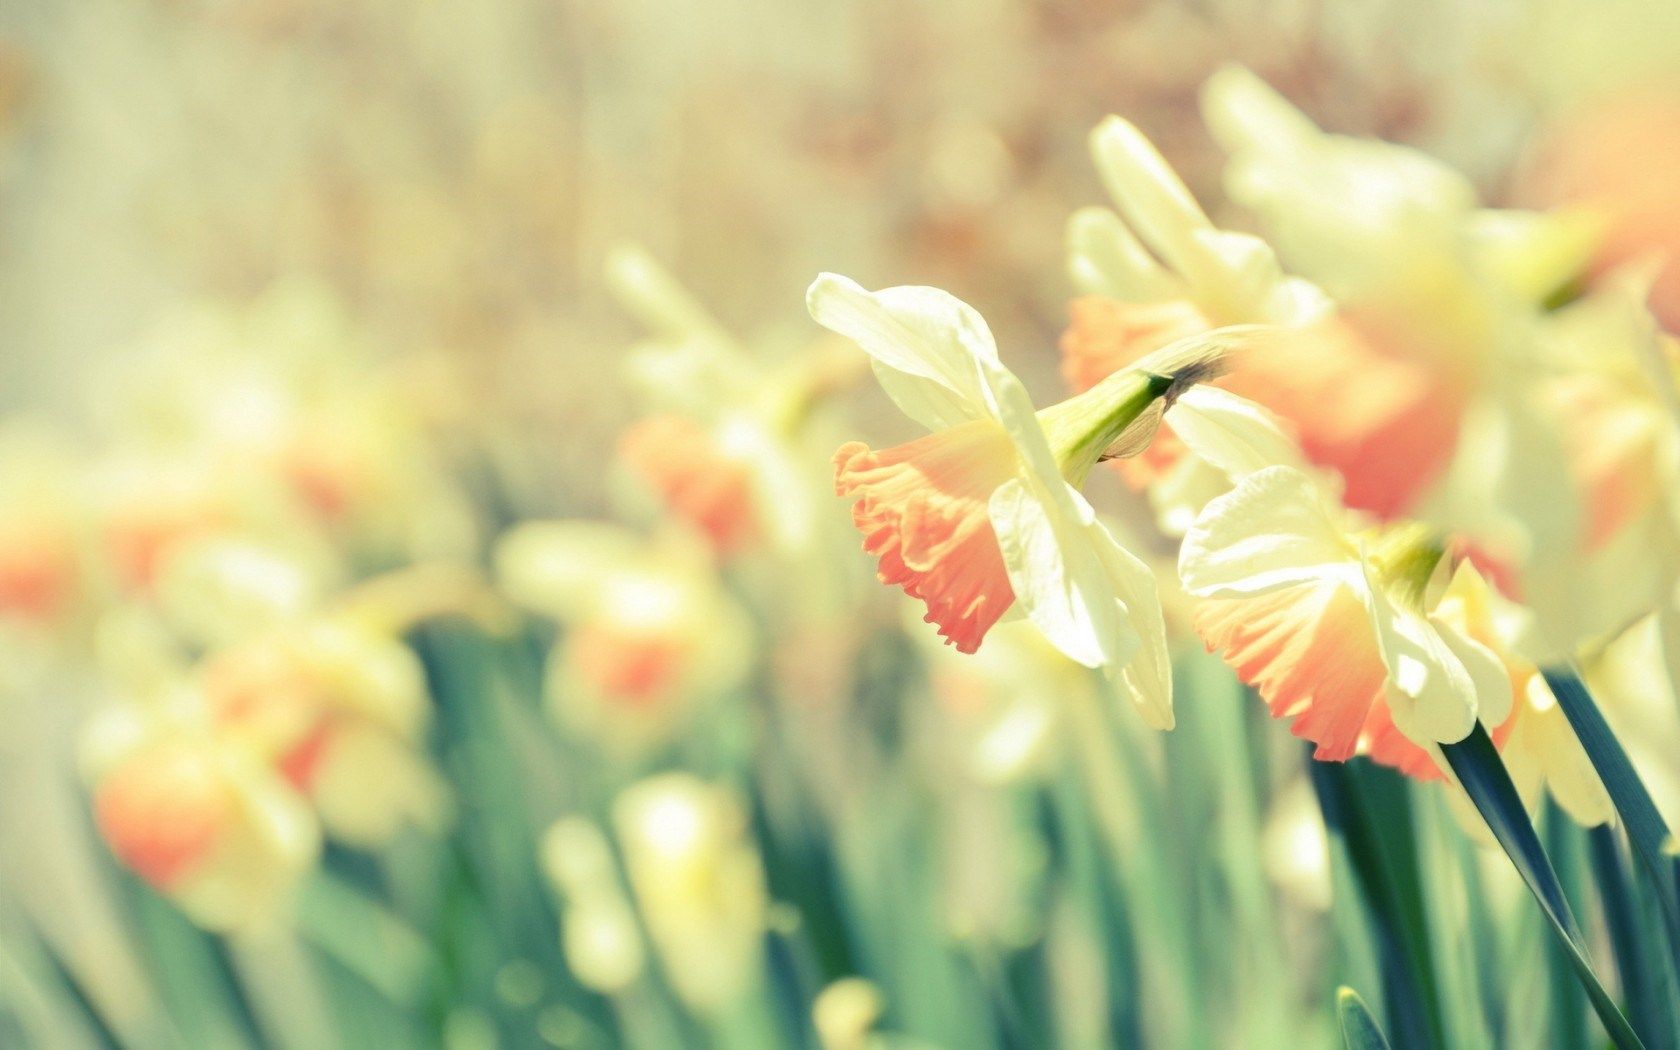 daffodils flowers images and wallpapers Download